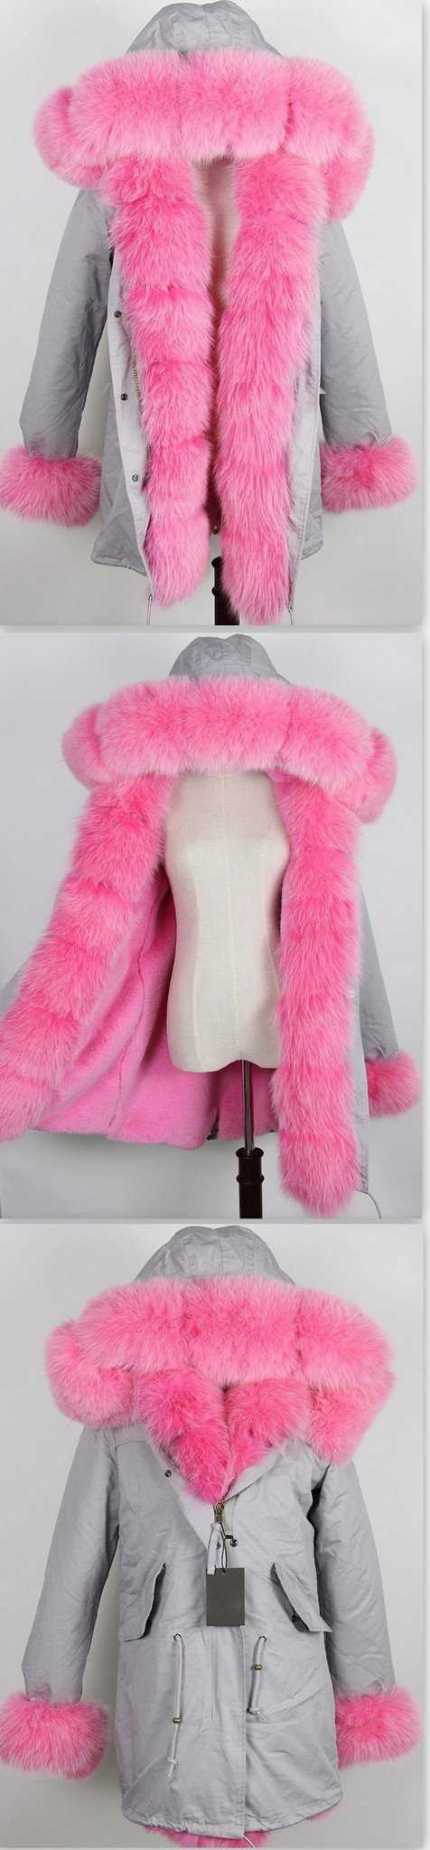 Army Parka Military Parka Coat with Fox Fur-Grey/Pink | DESIGNER INSPIRED FASHIONS